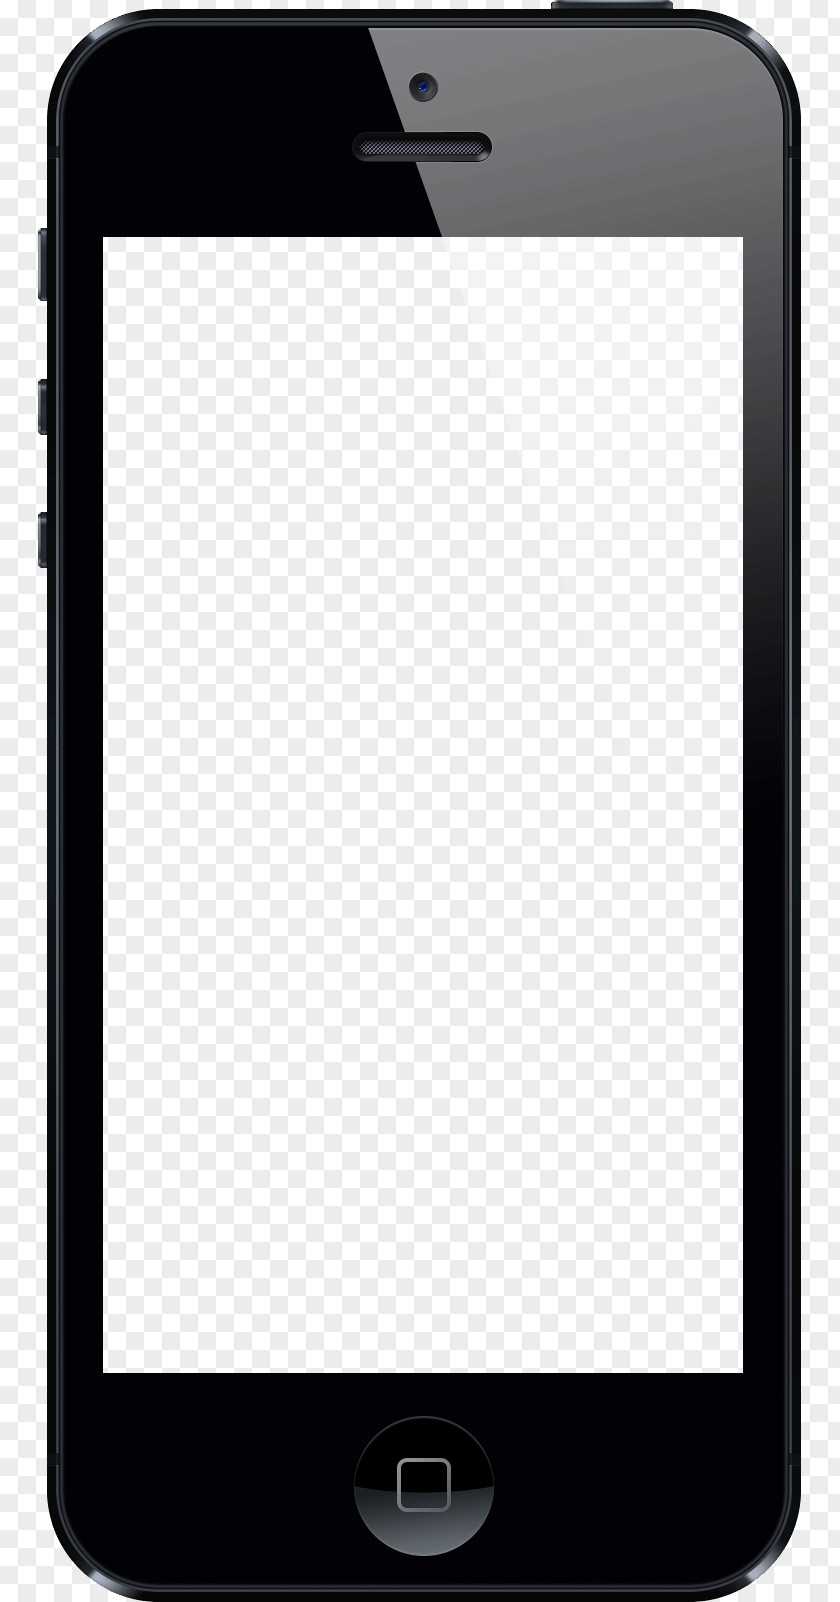 Smartphone IPhone 5s 7 Plus 6 PNG